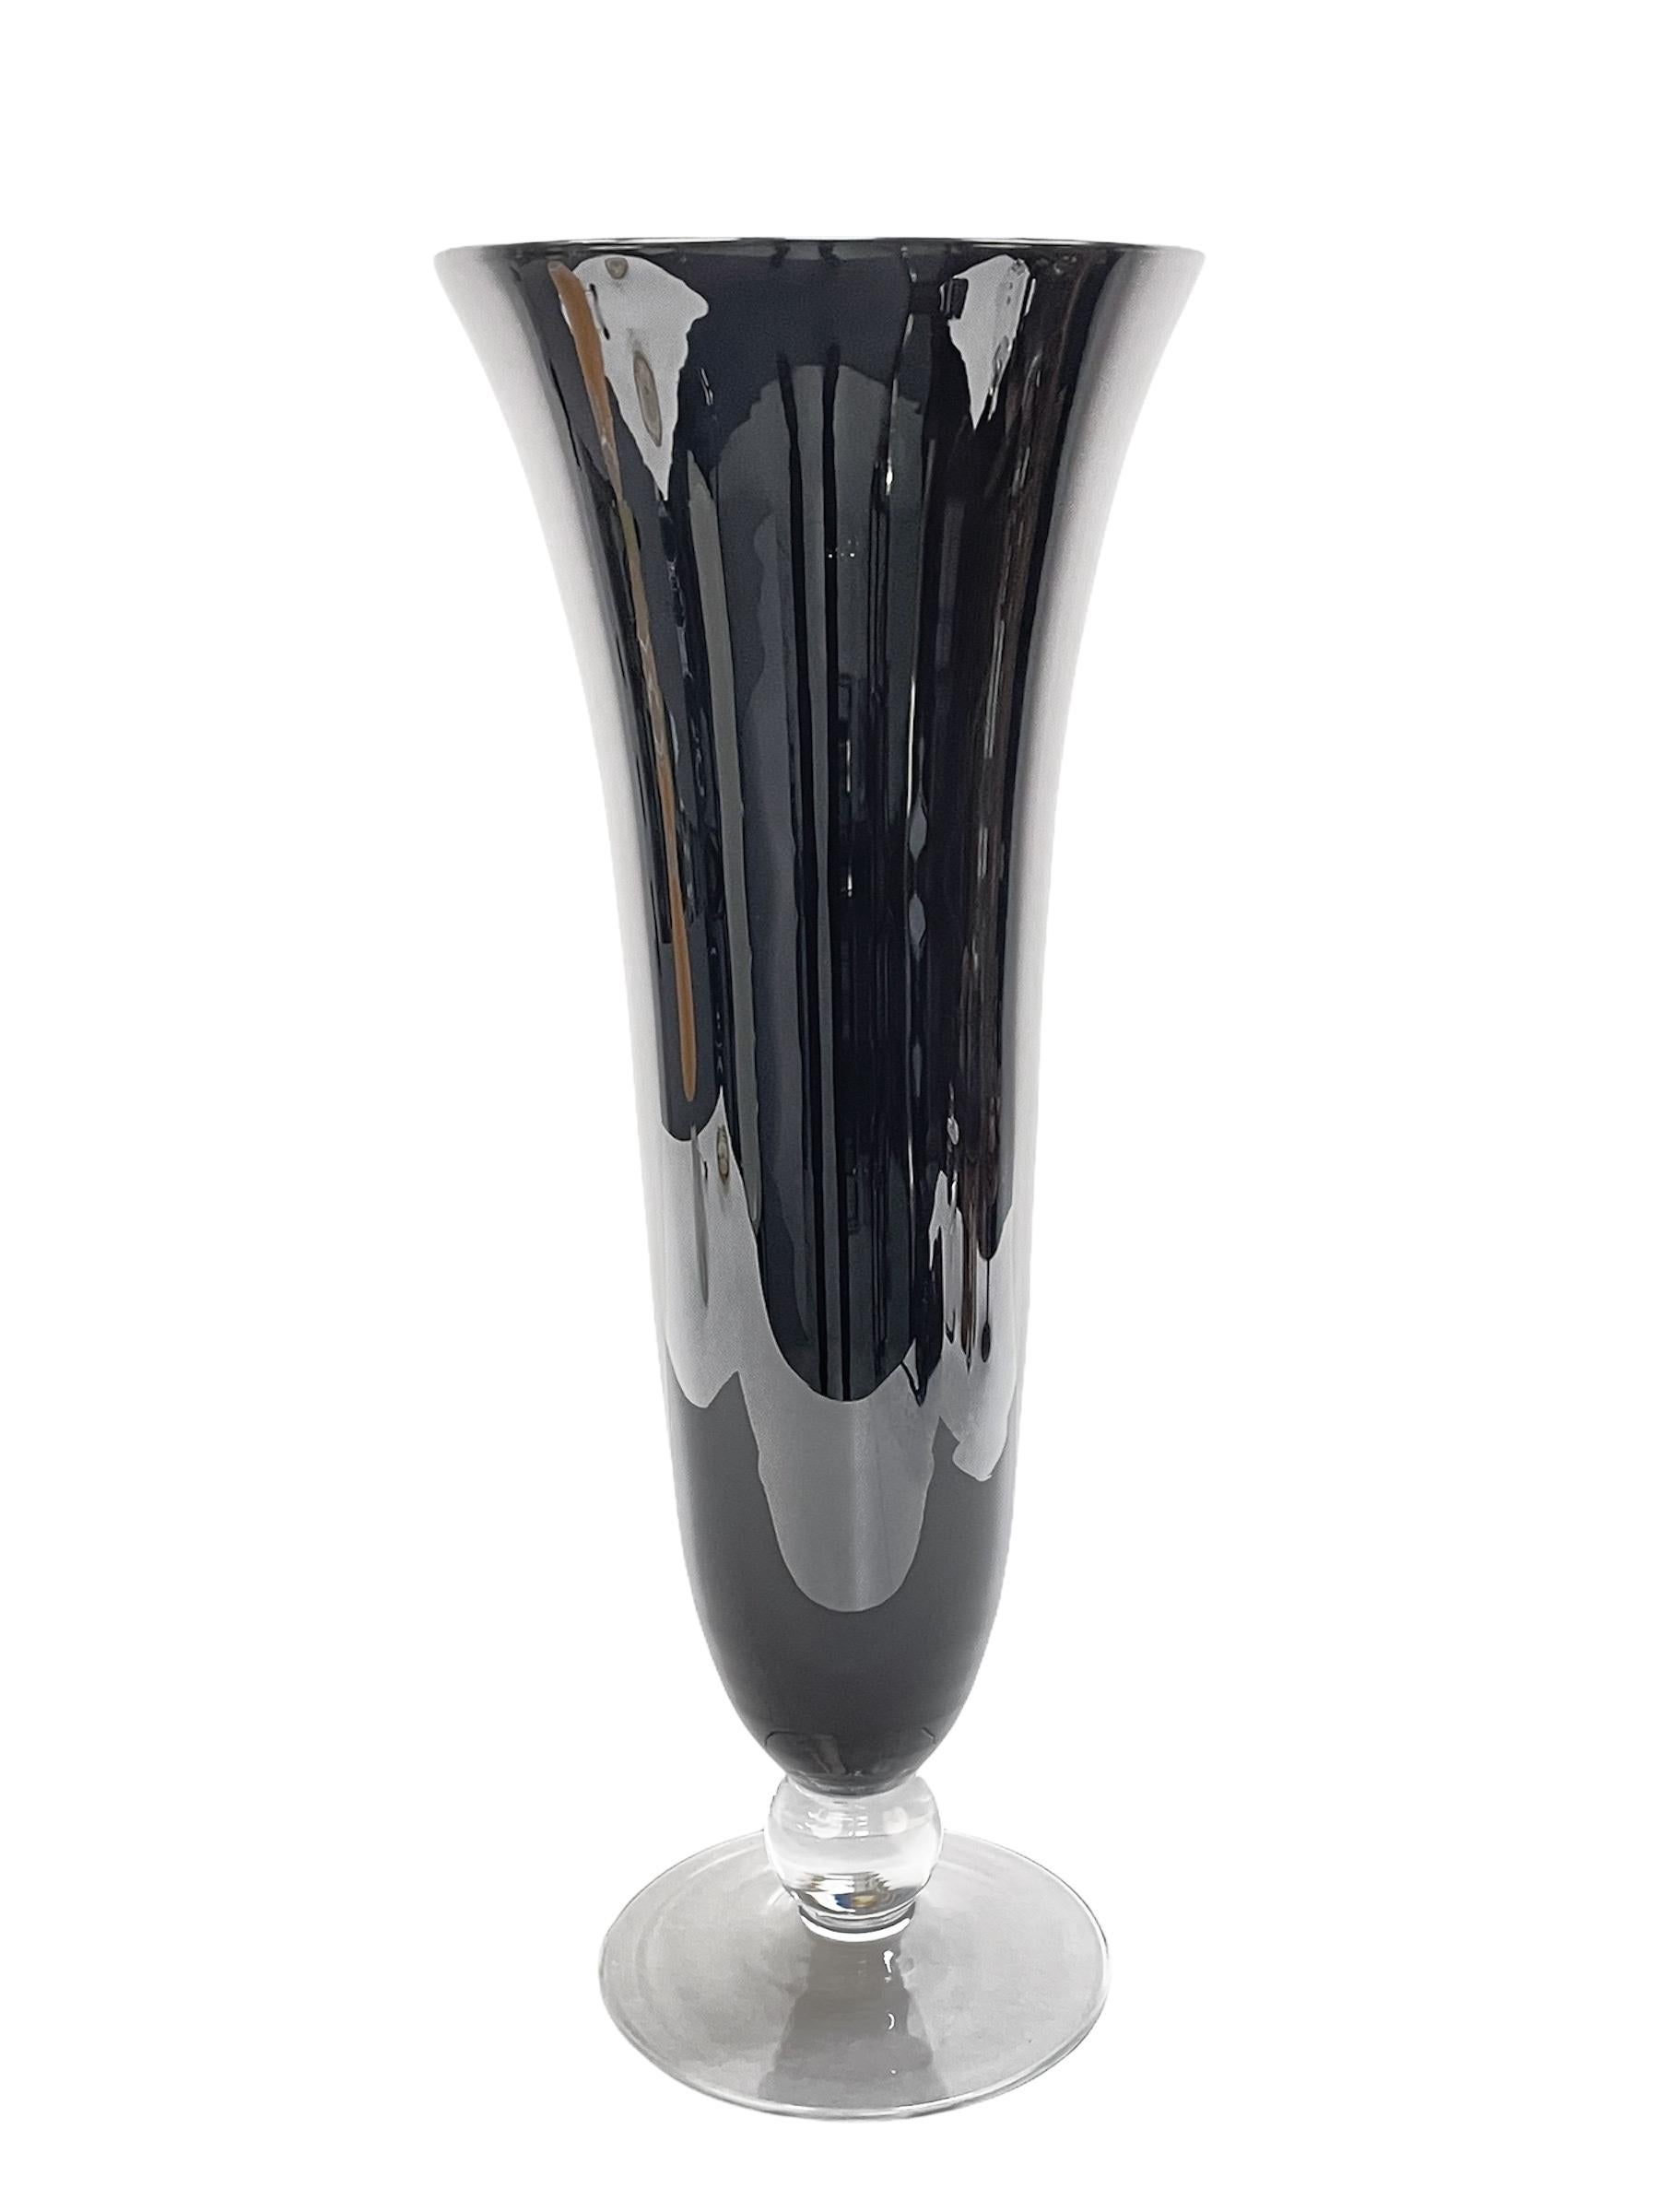 Midcentury Large Italian Black Glass Artistic Vase with Crystal Base, 1980s For Sale 1